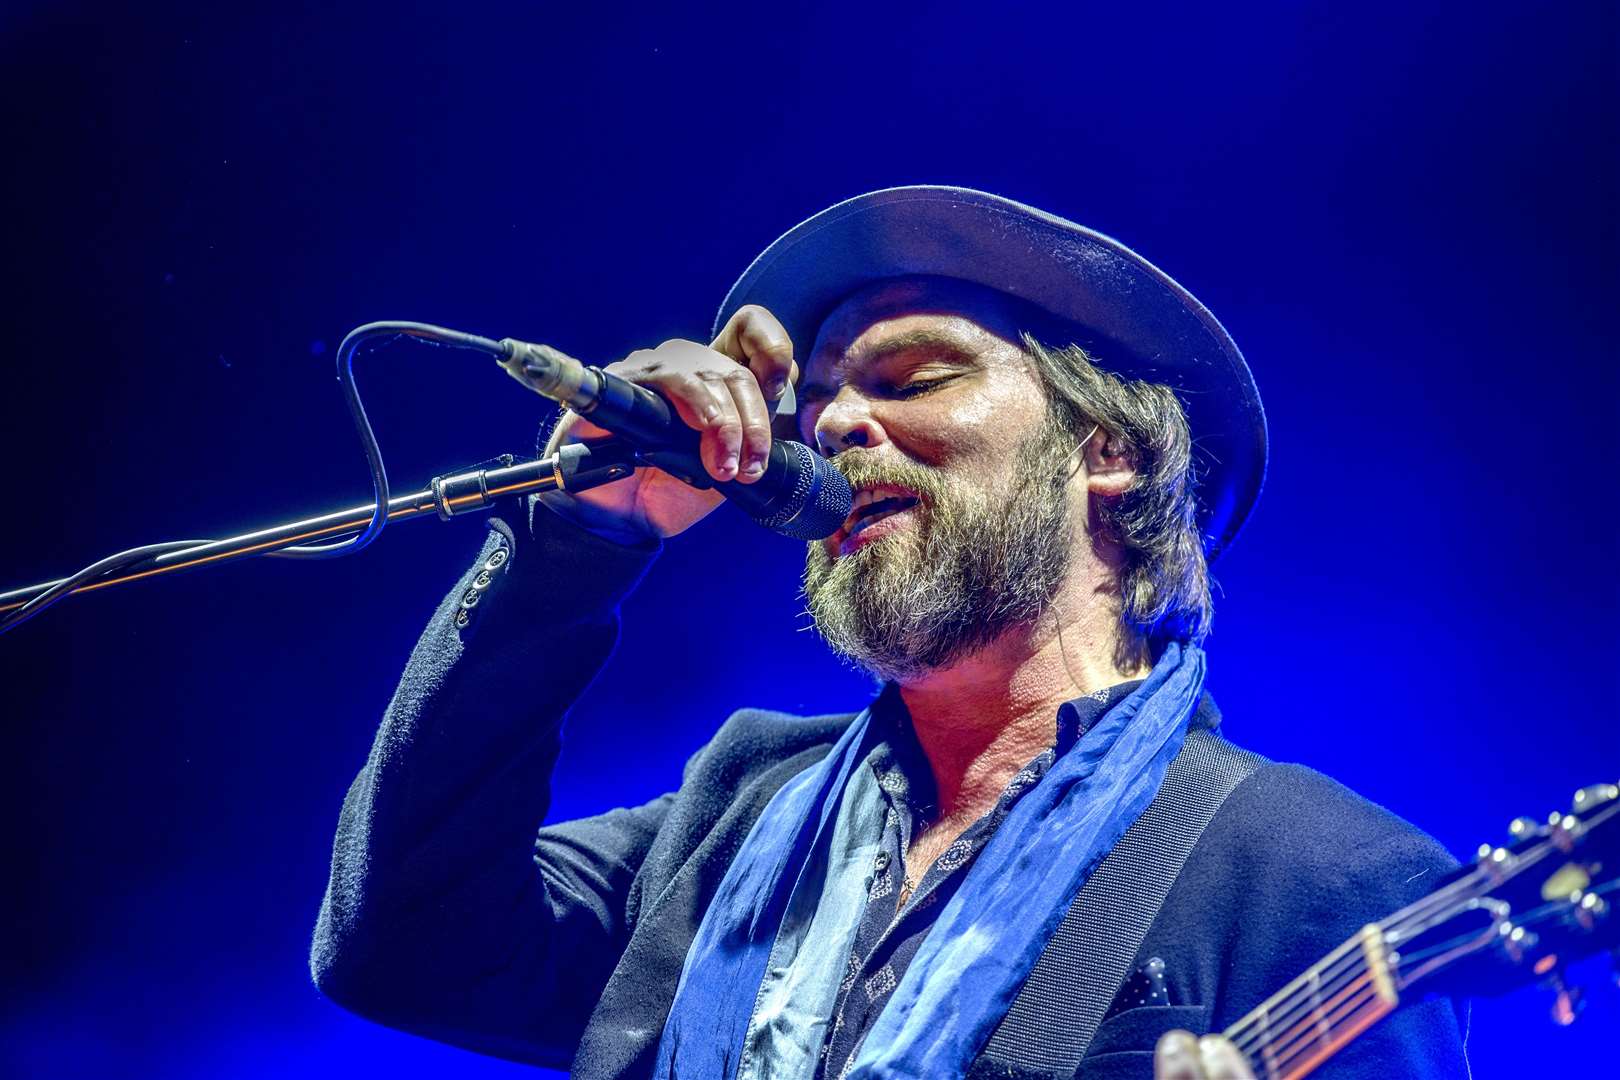 Gaz Coombes will be fronting the festival with Supergrass. Picture: Mark Williamson